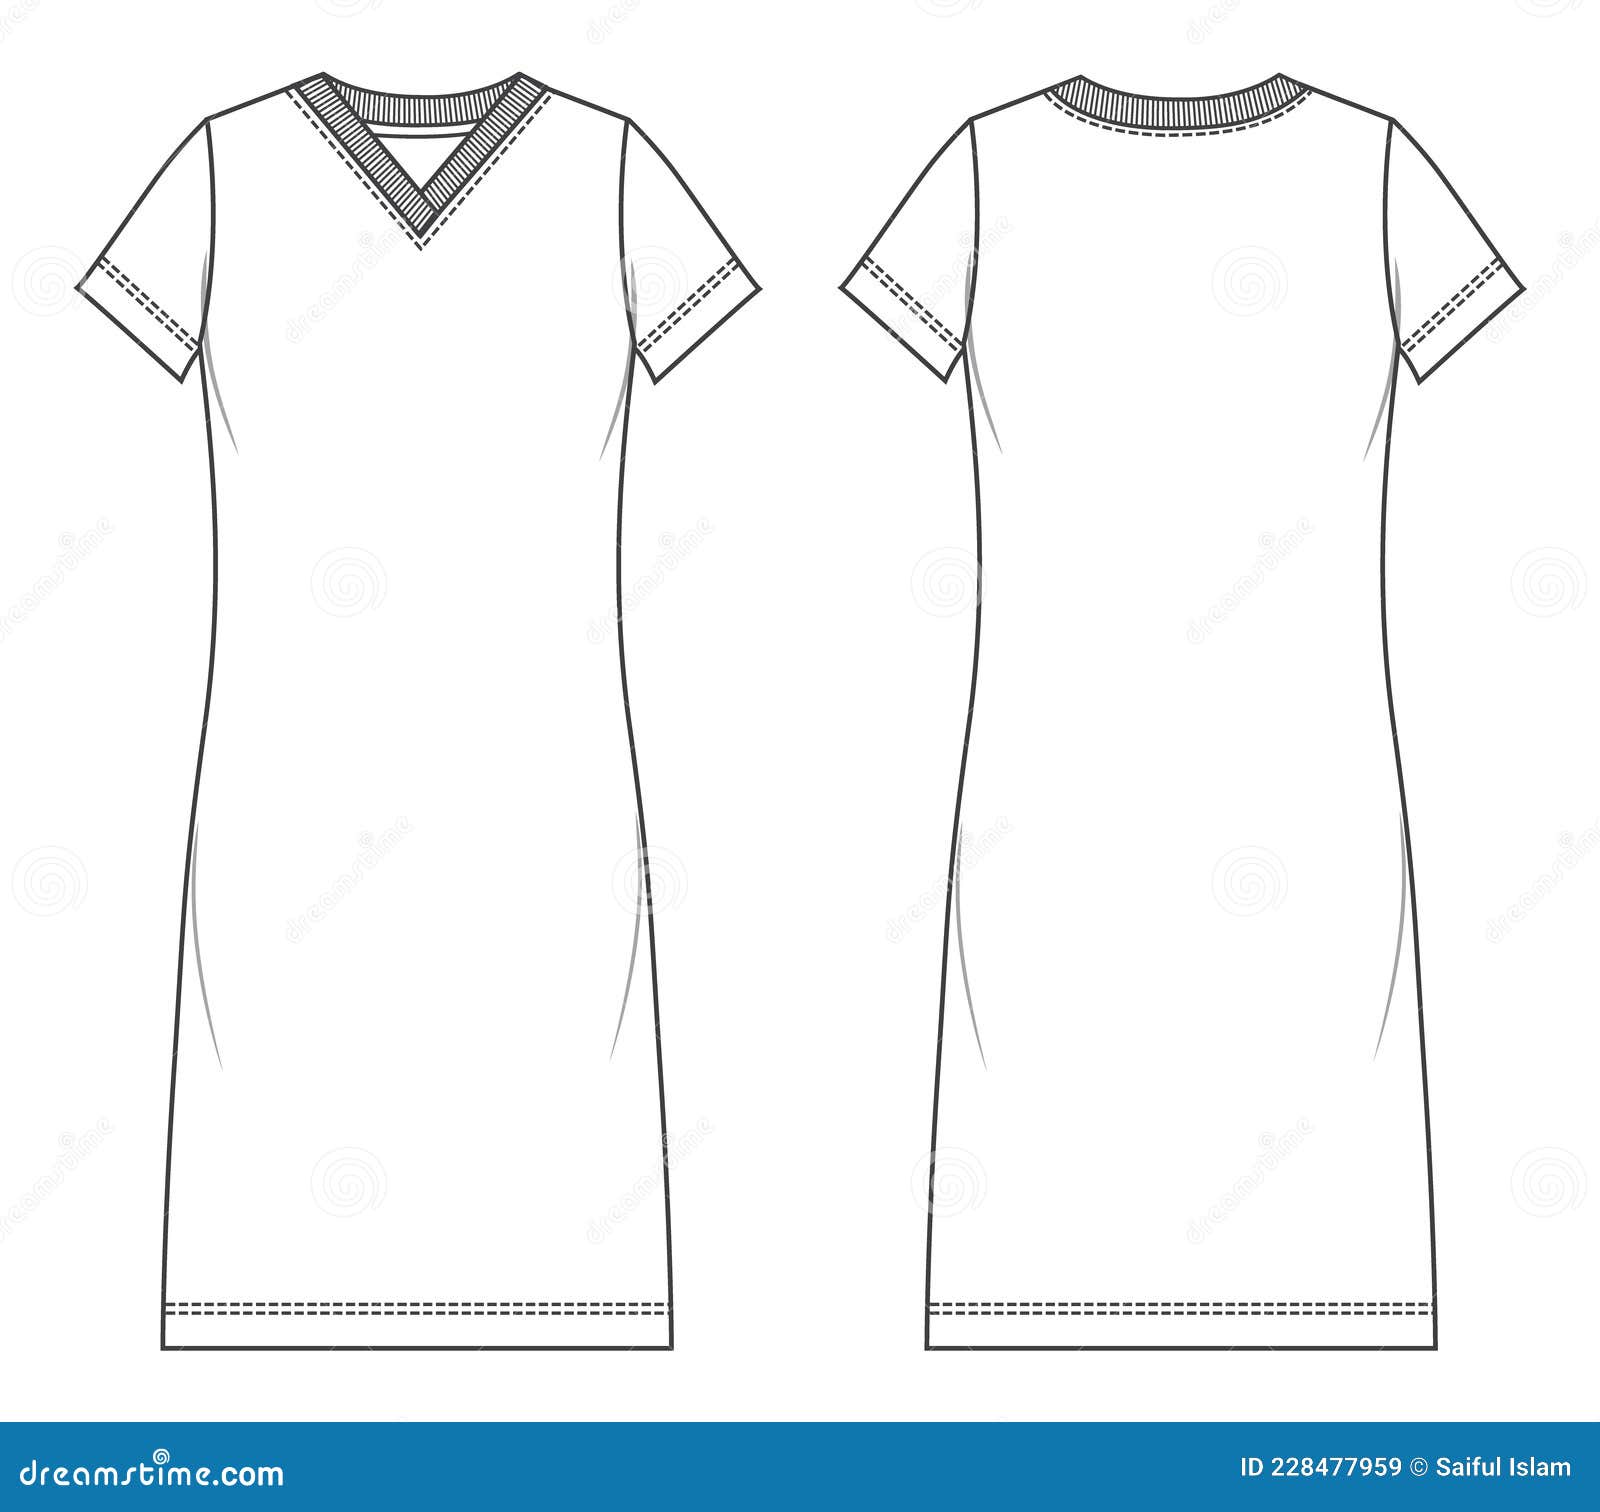 V-neck Ladies Long Stylish Dress Overall Technical Fashion Sketch ...